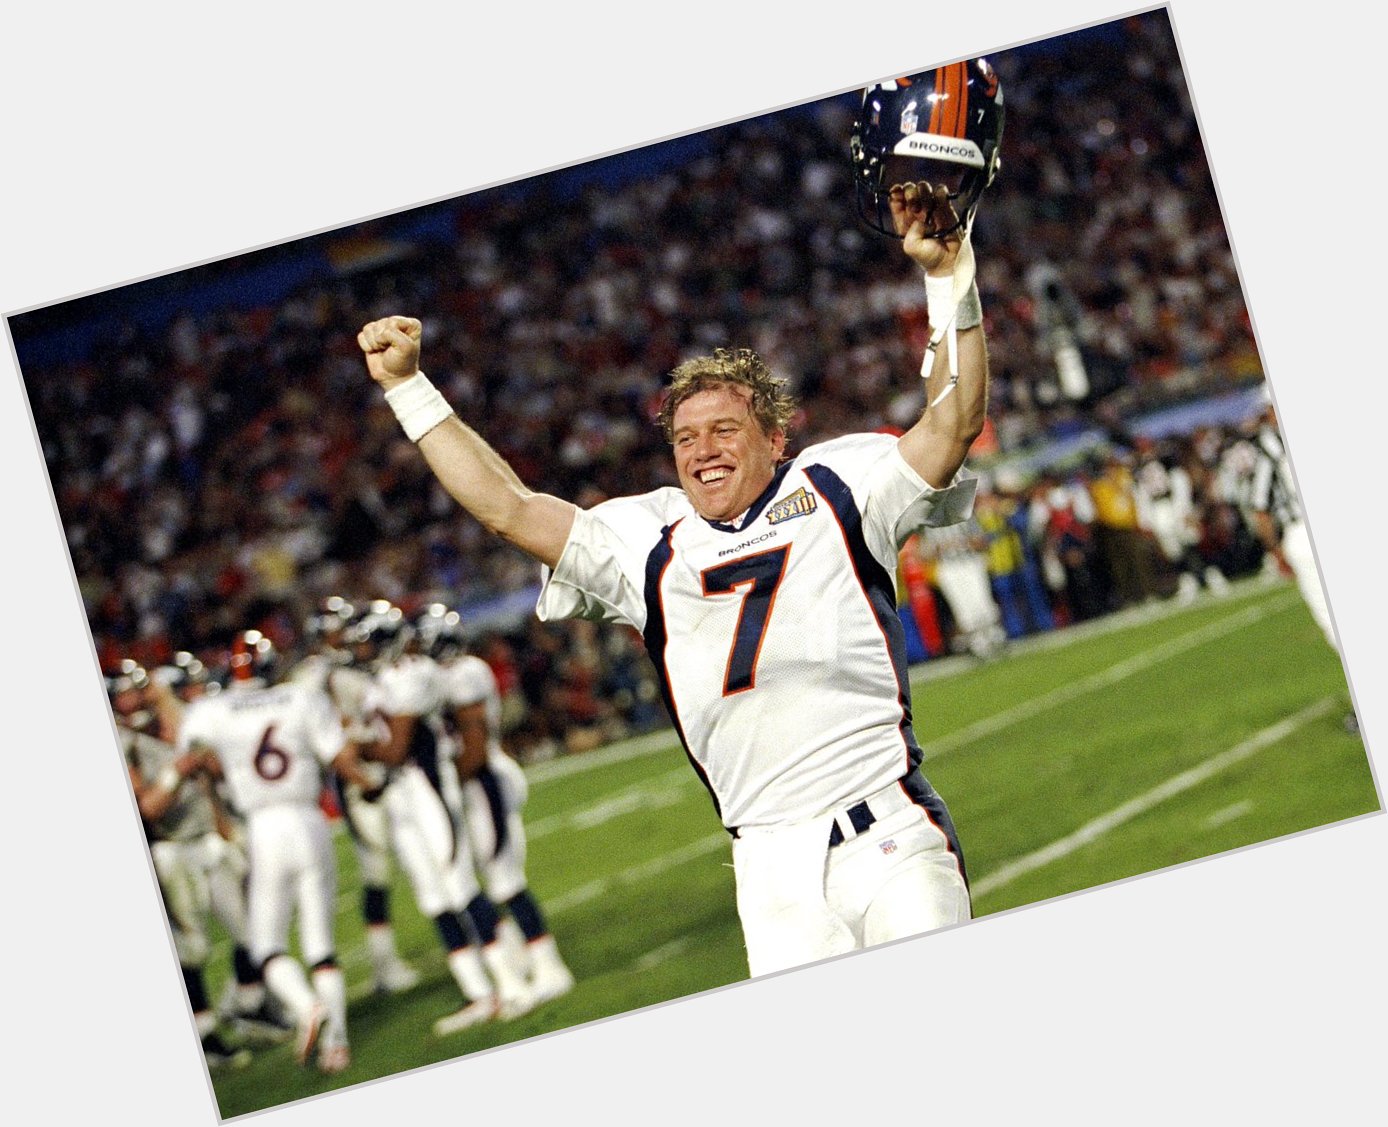 Seven wins in a row for the Rockies, happy birthday John Elway 